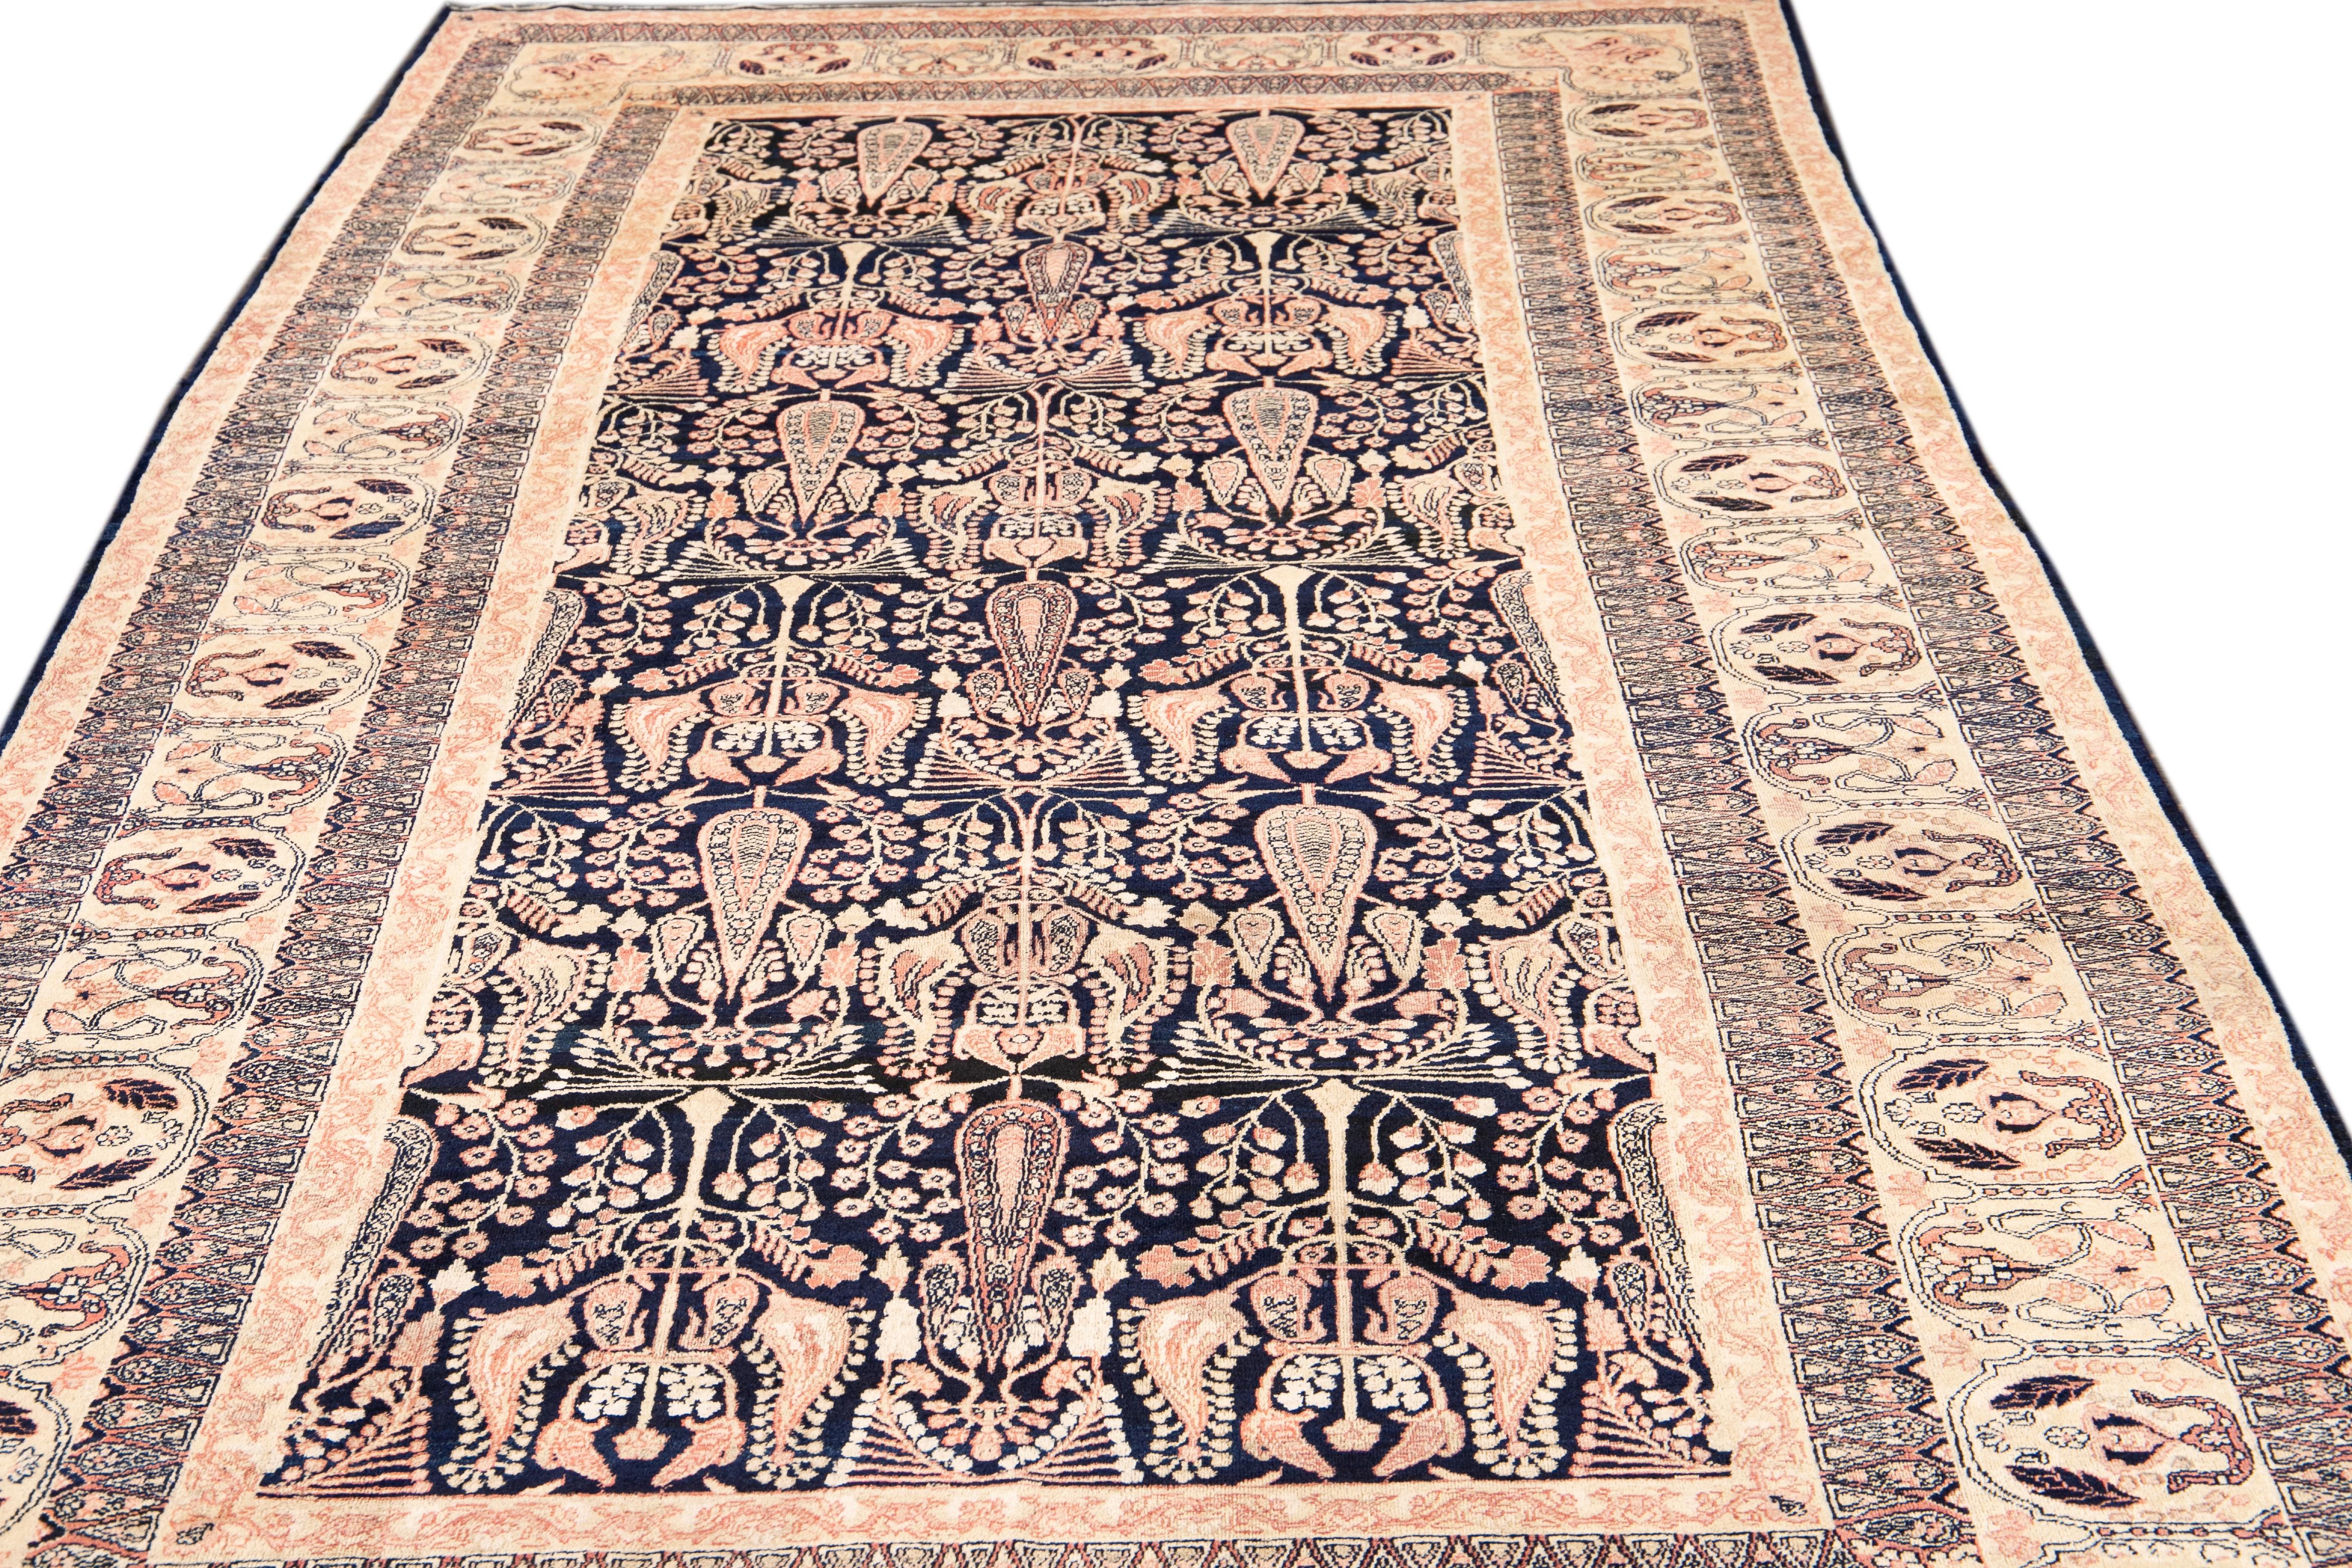 Beautiful antique Kerman hand knotted wool rug with a dark blue field. This Persian rug has peach and beige accents in a gorgeous all-over floral pattern design.

This rug measures: 5'11